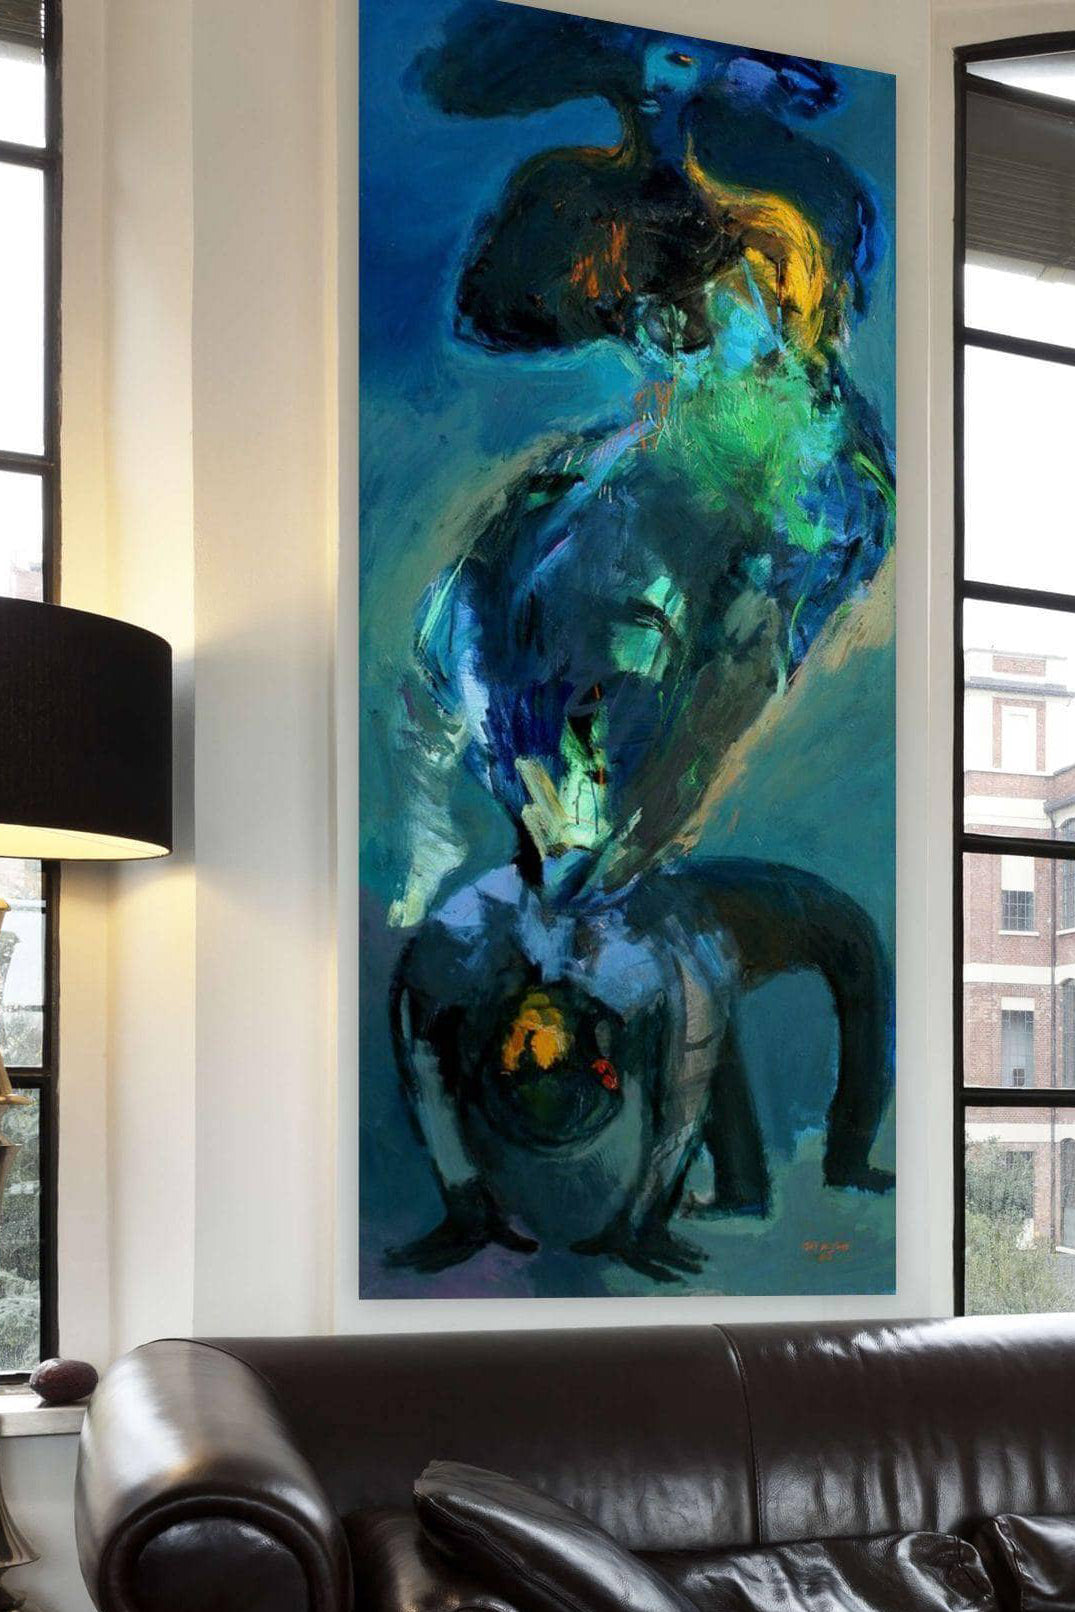 Abstract Love Figural Painting adds to this city like living room with lovers and passion